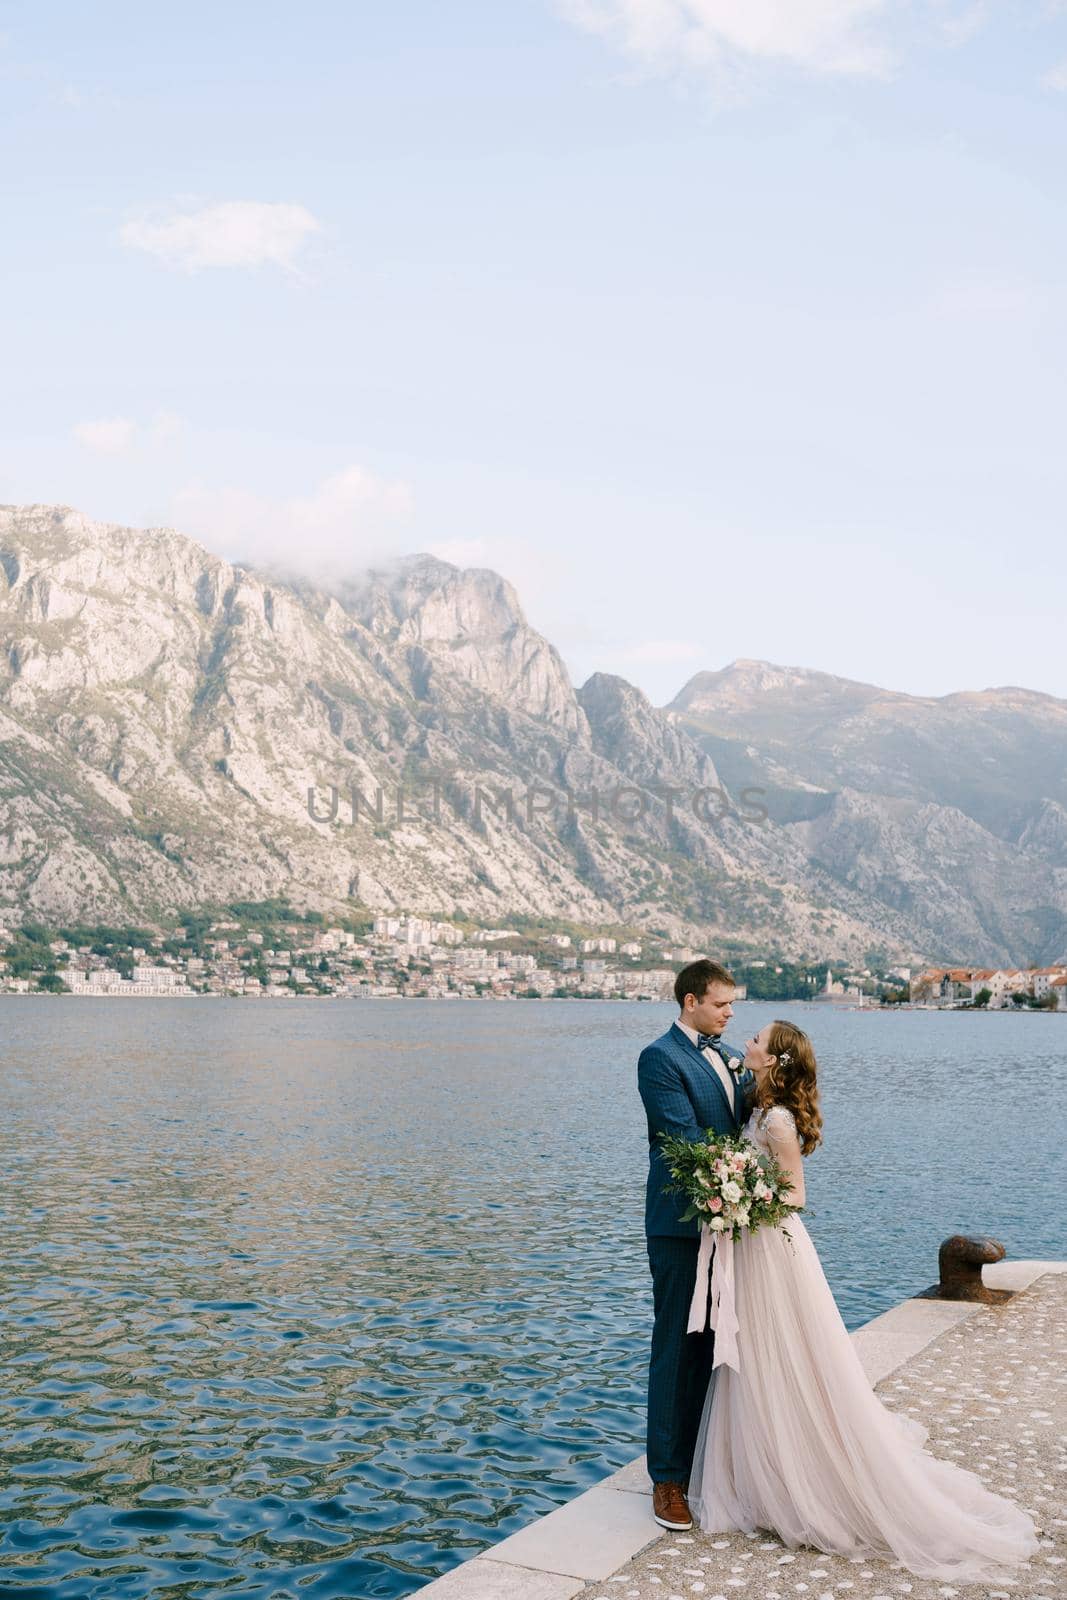 Groom hugs bride on the pier against the background of mountains by Nadtochiy